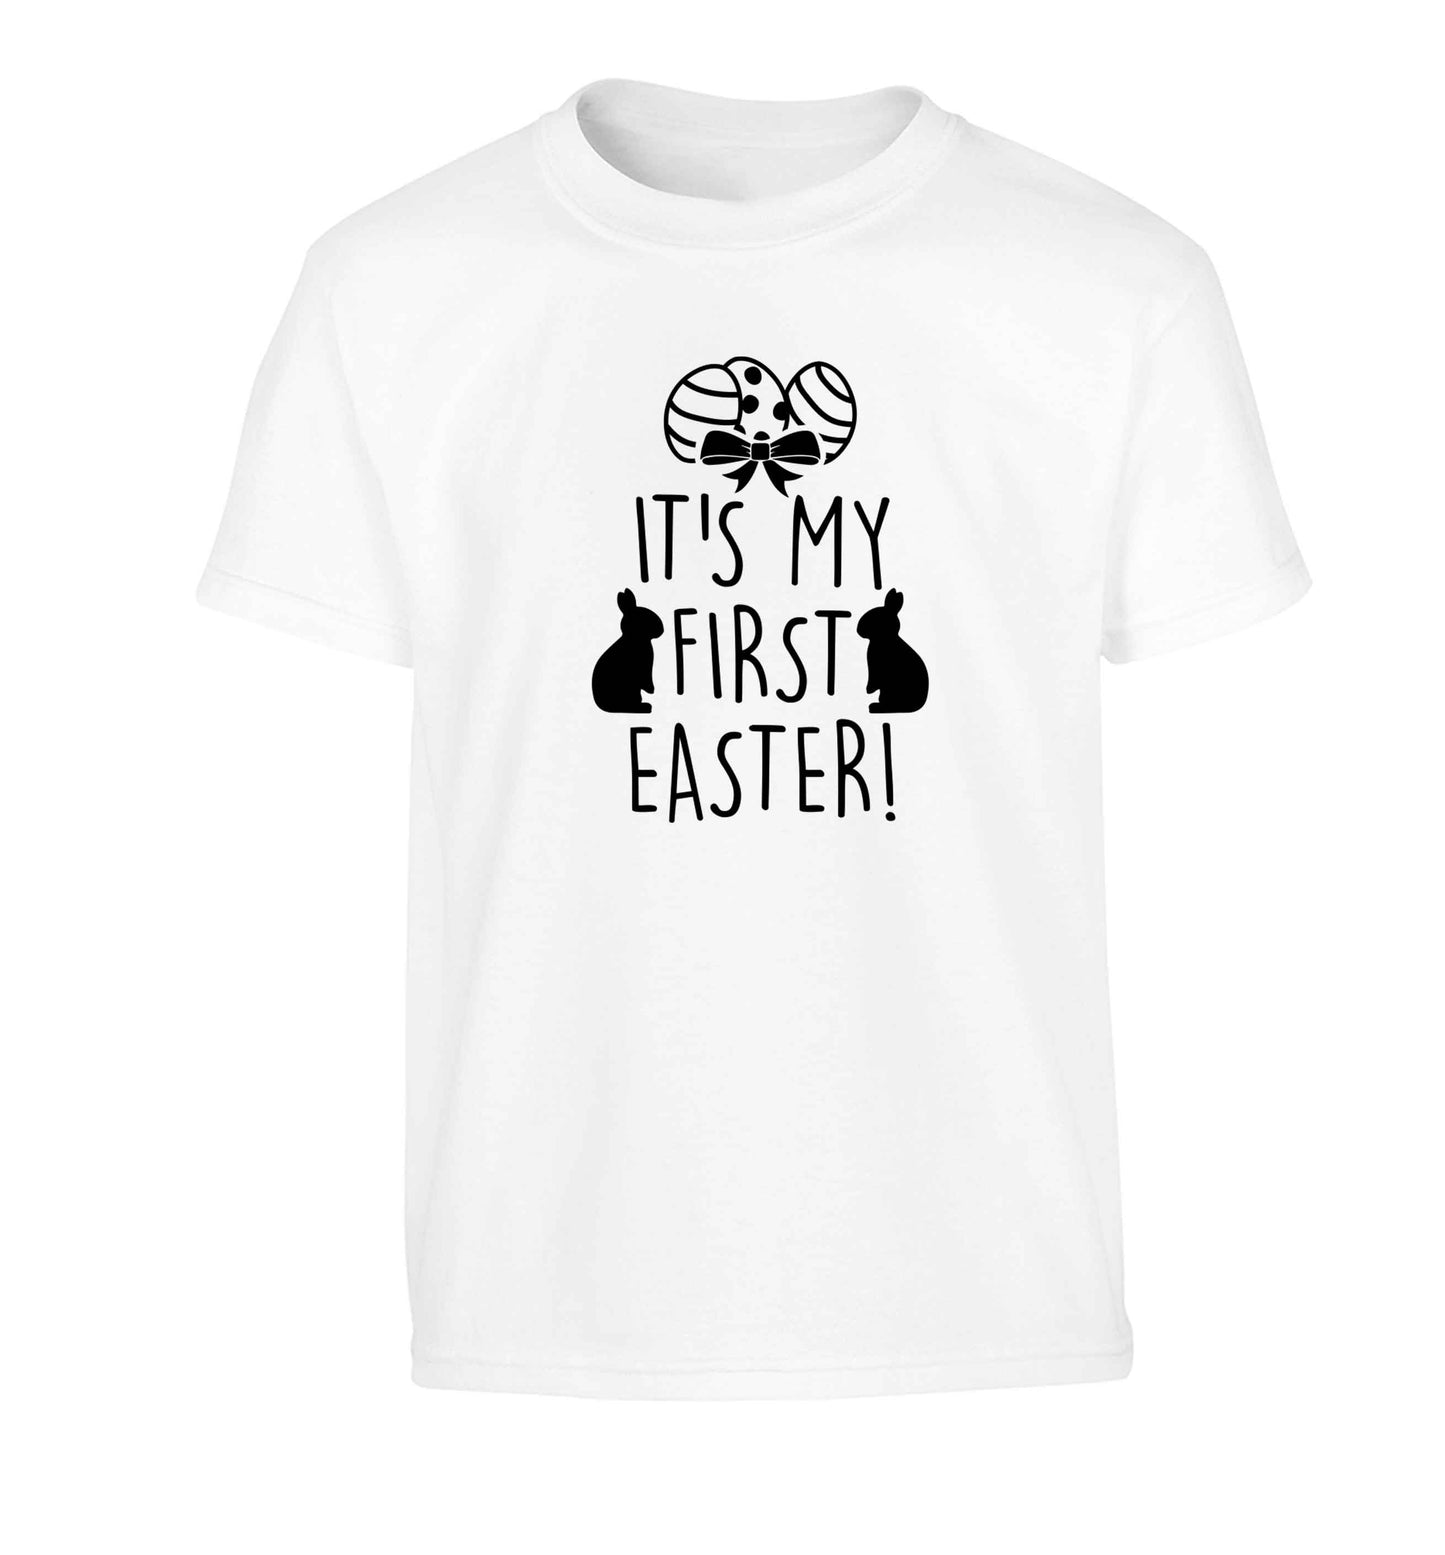 It's my first Easter Children's white Tshirt 12-13 Years